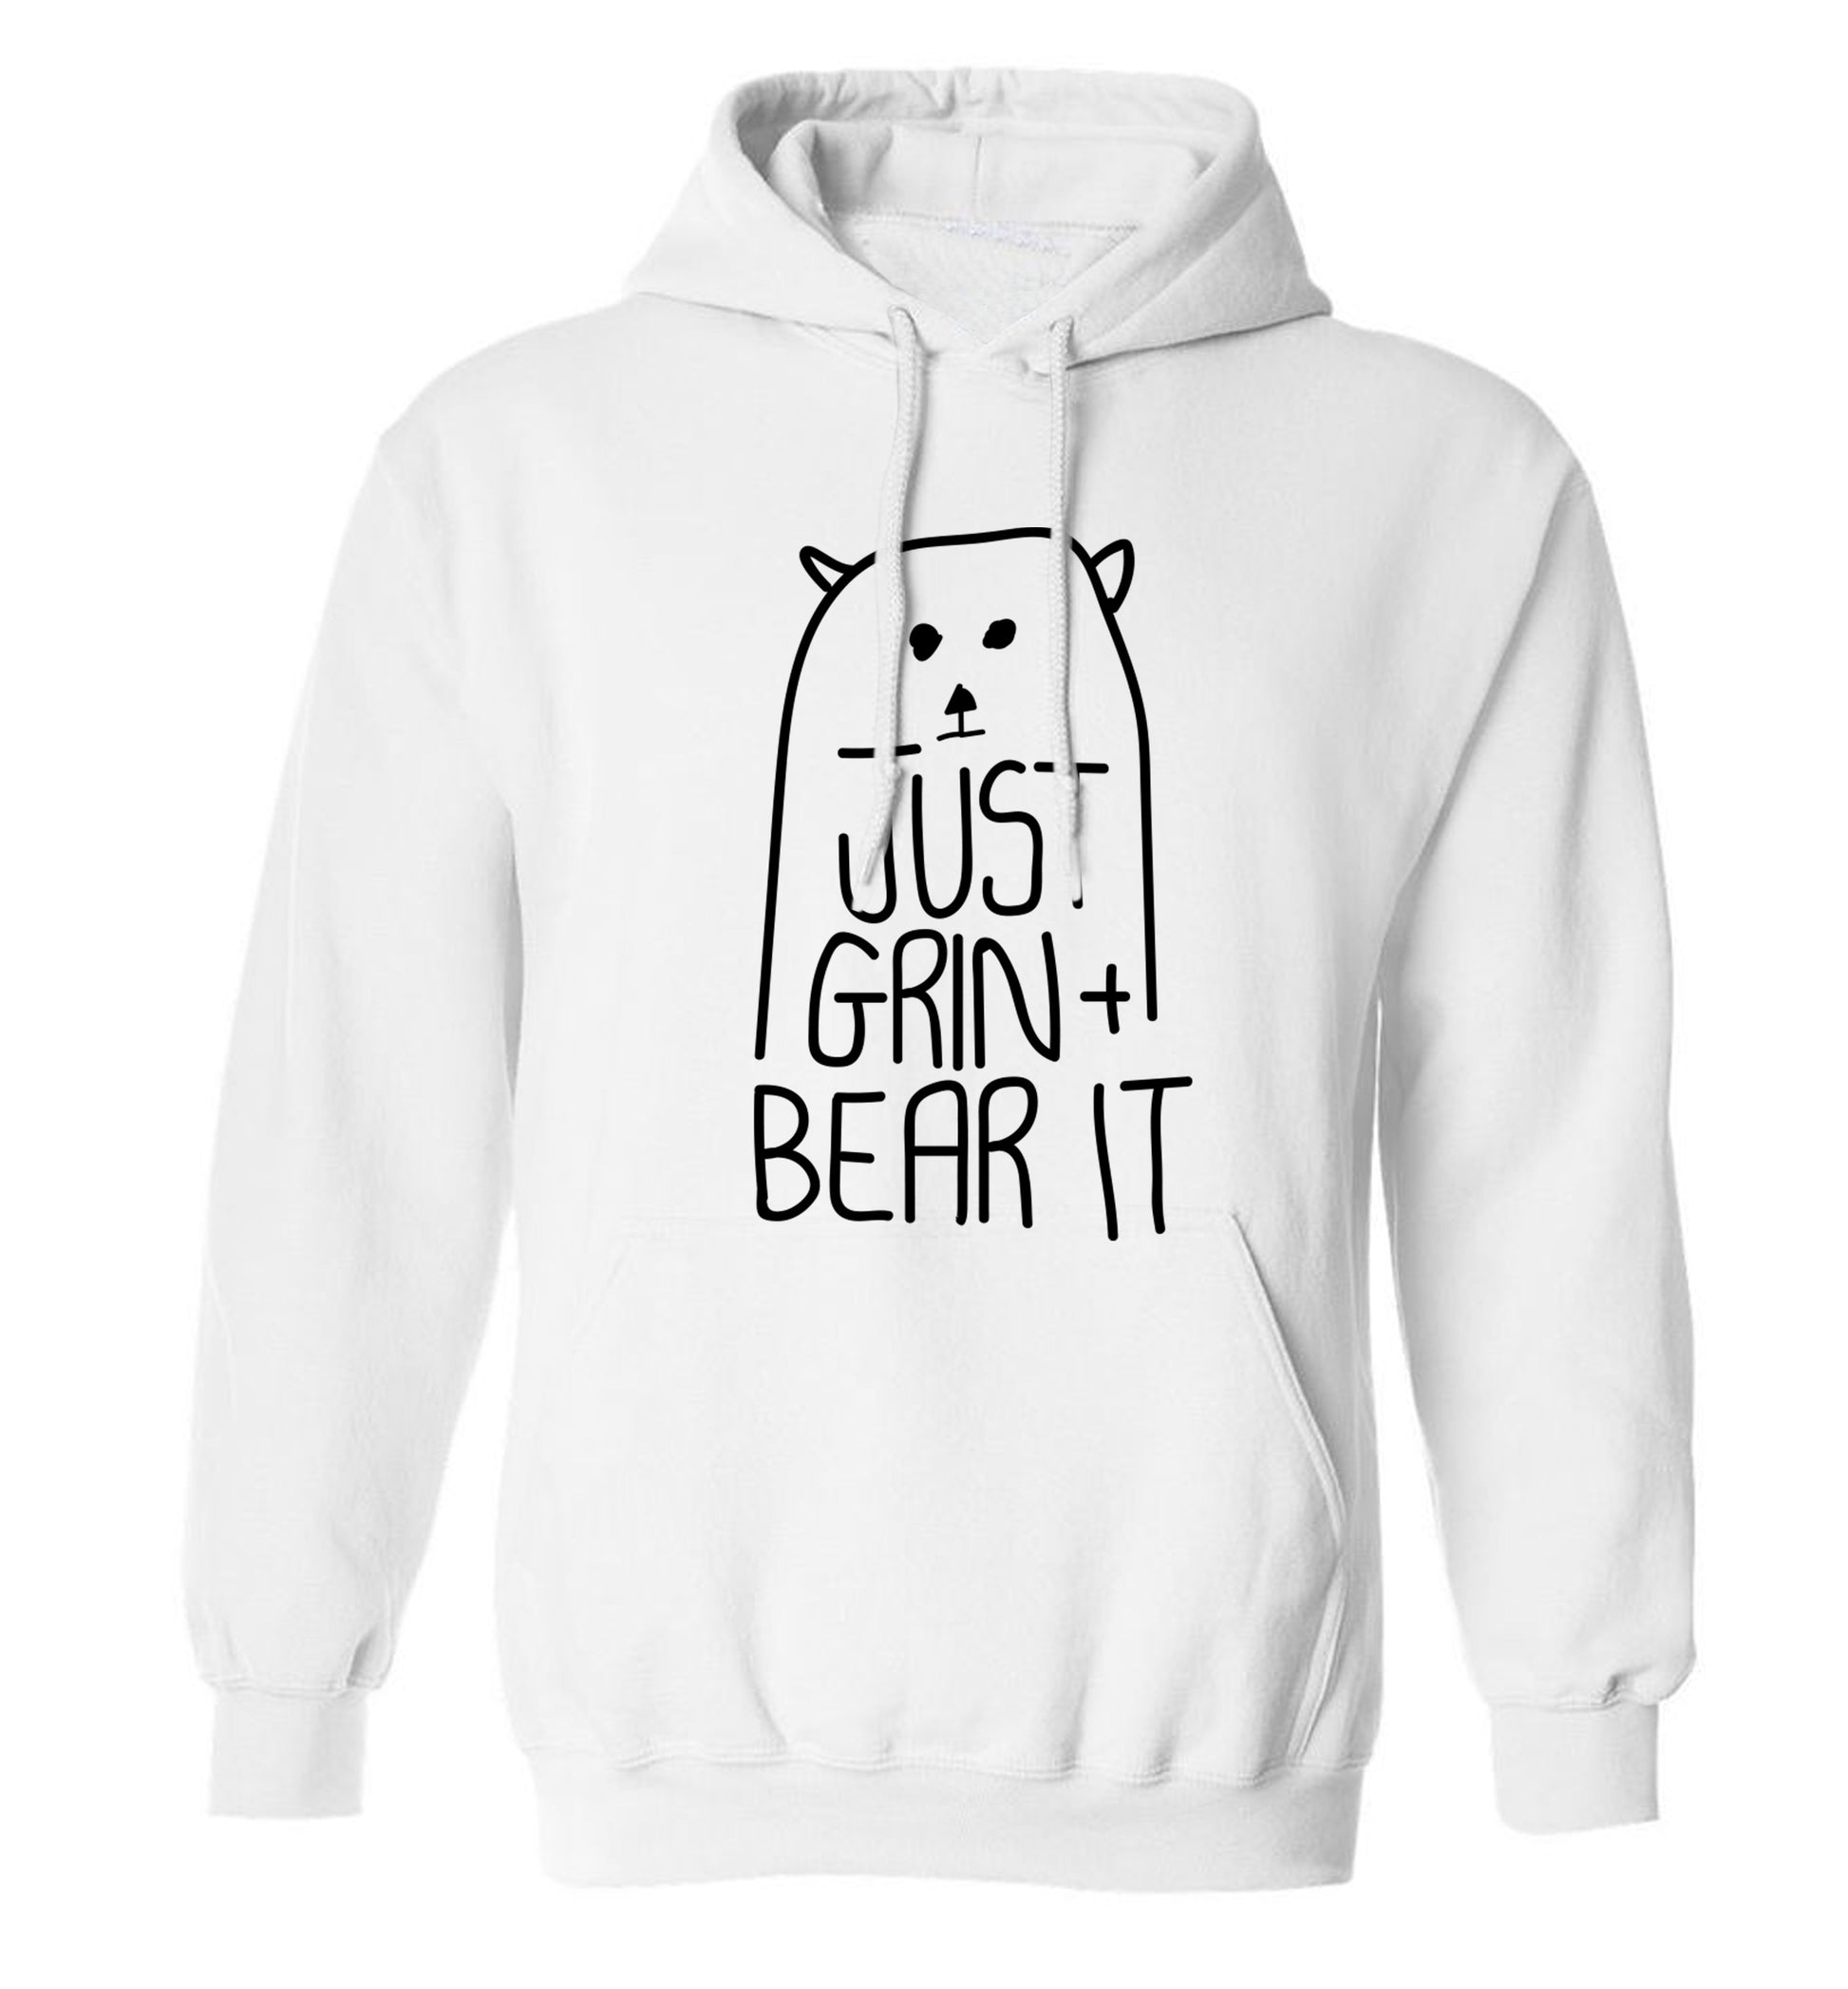 Just grin and bear it adults unisex white hoodie 2XL